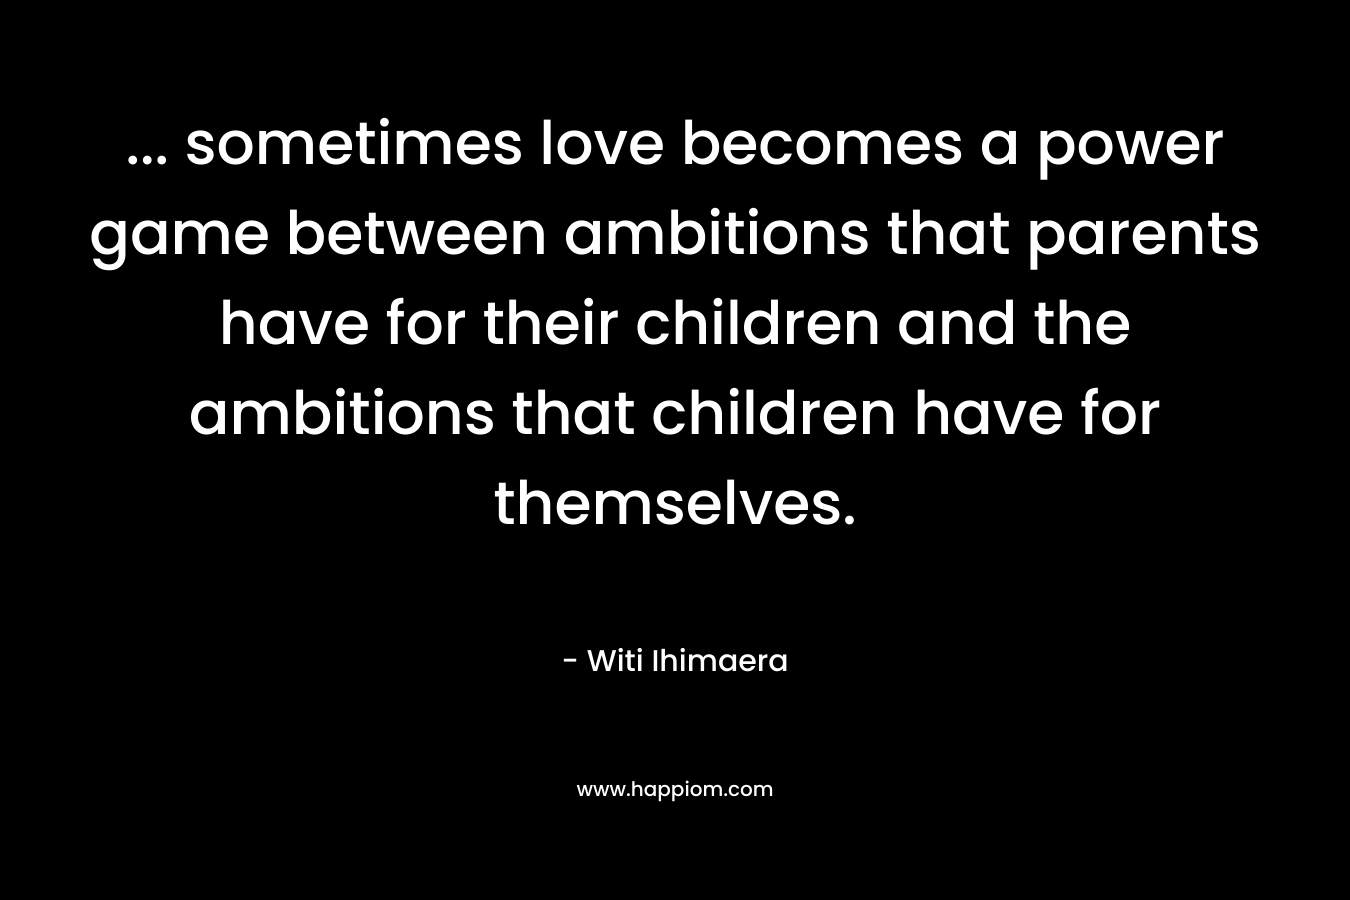 ... sometimes love becomes a power game between ambitions that parents have for their children and the ambitions that children have for themselves.